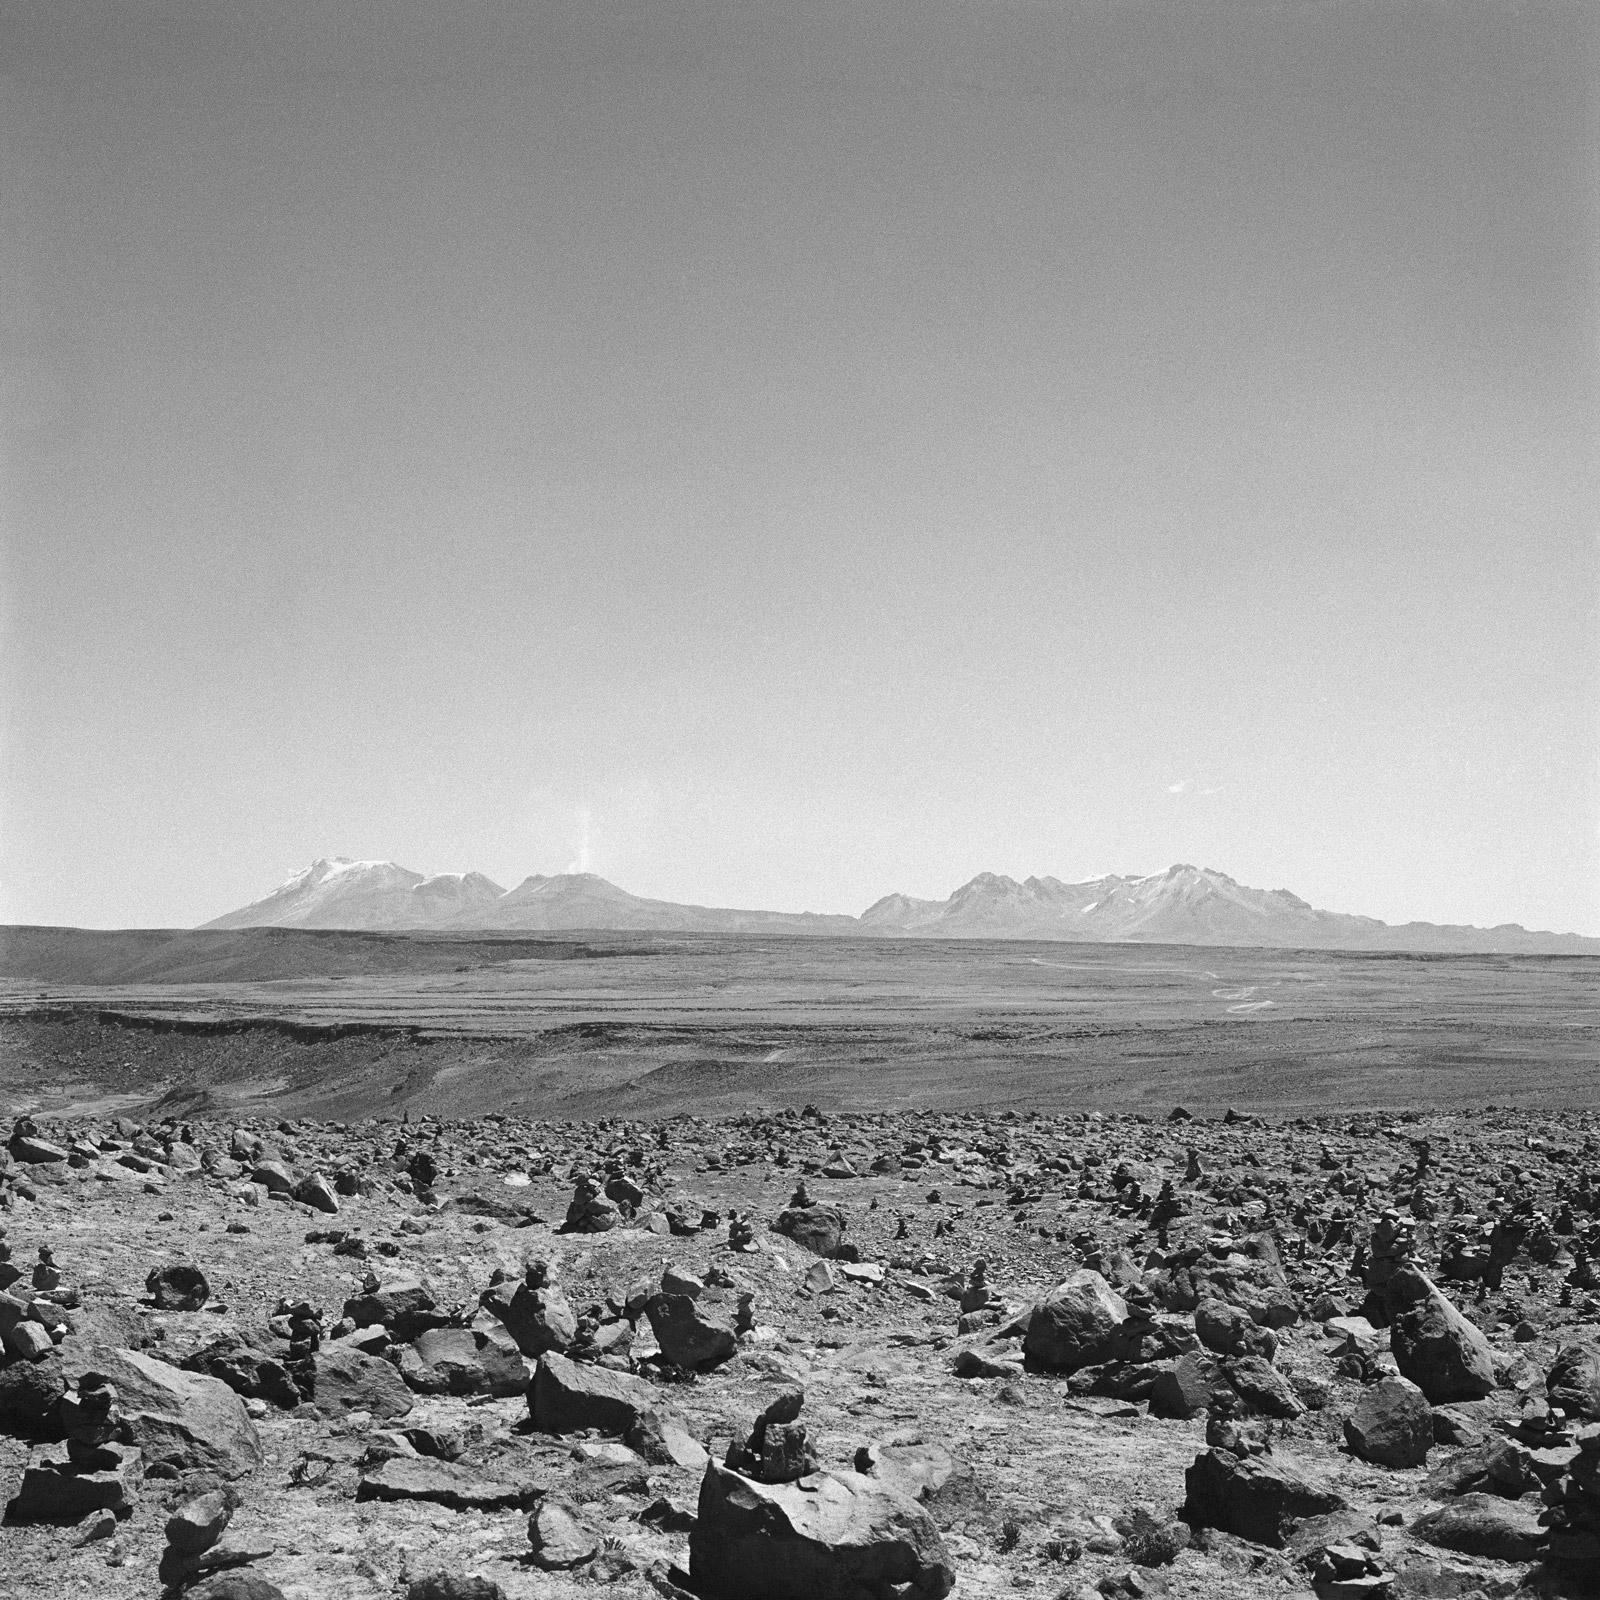 Edition of 7. Signed.
Series, Études Topographiques, In Other Worlds

Tougas took the photograph on his Hasselblad 500CM - a medium format camera - and used a black and white film. The negative was scanned using a drum scanner. The resulting